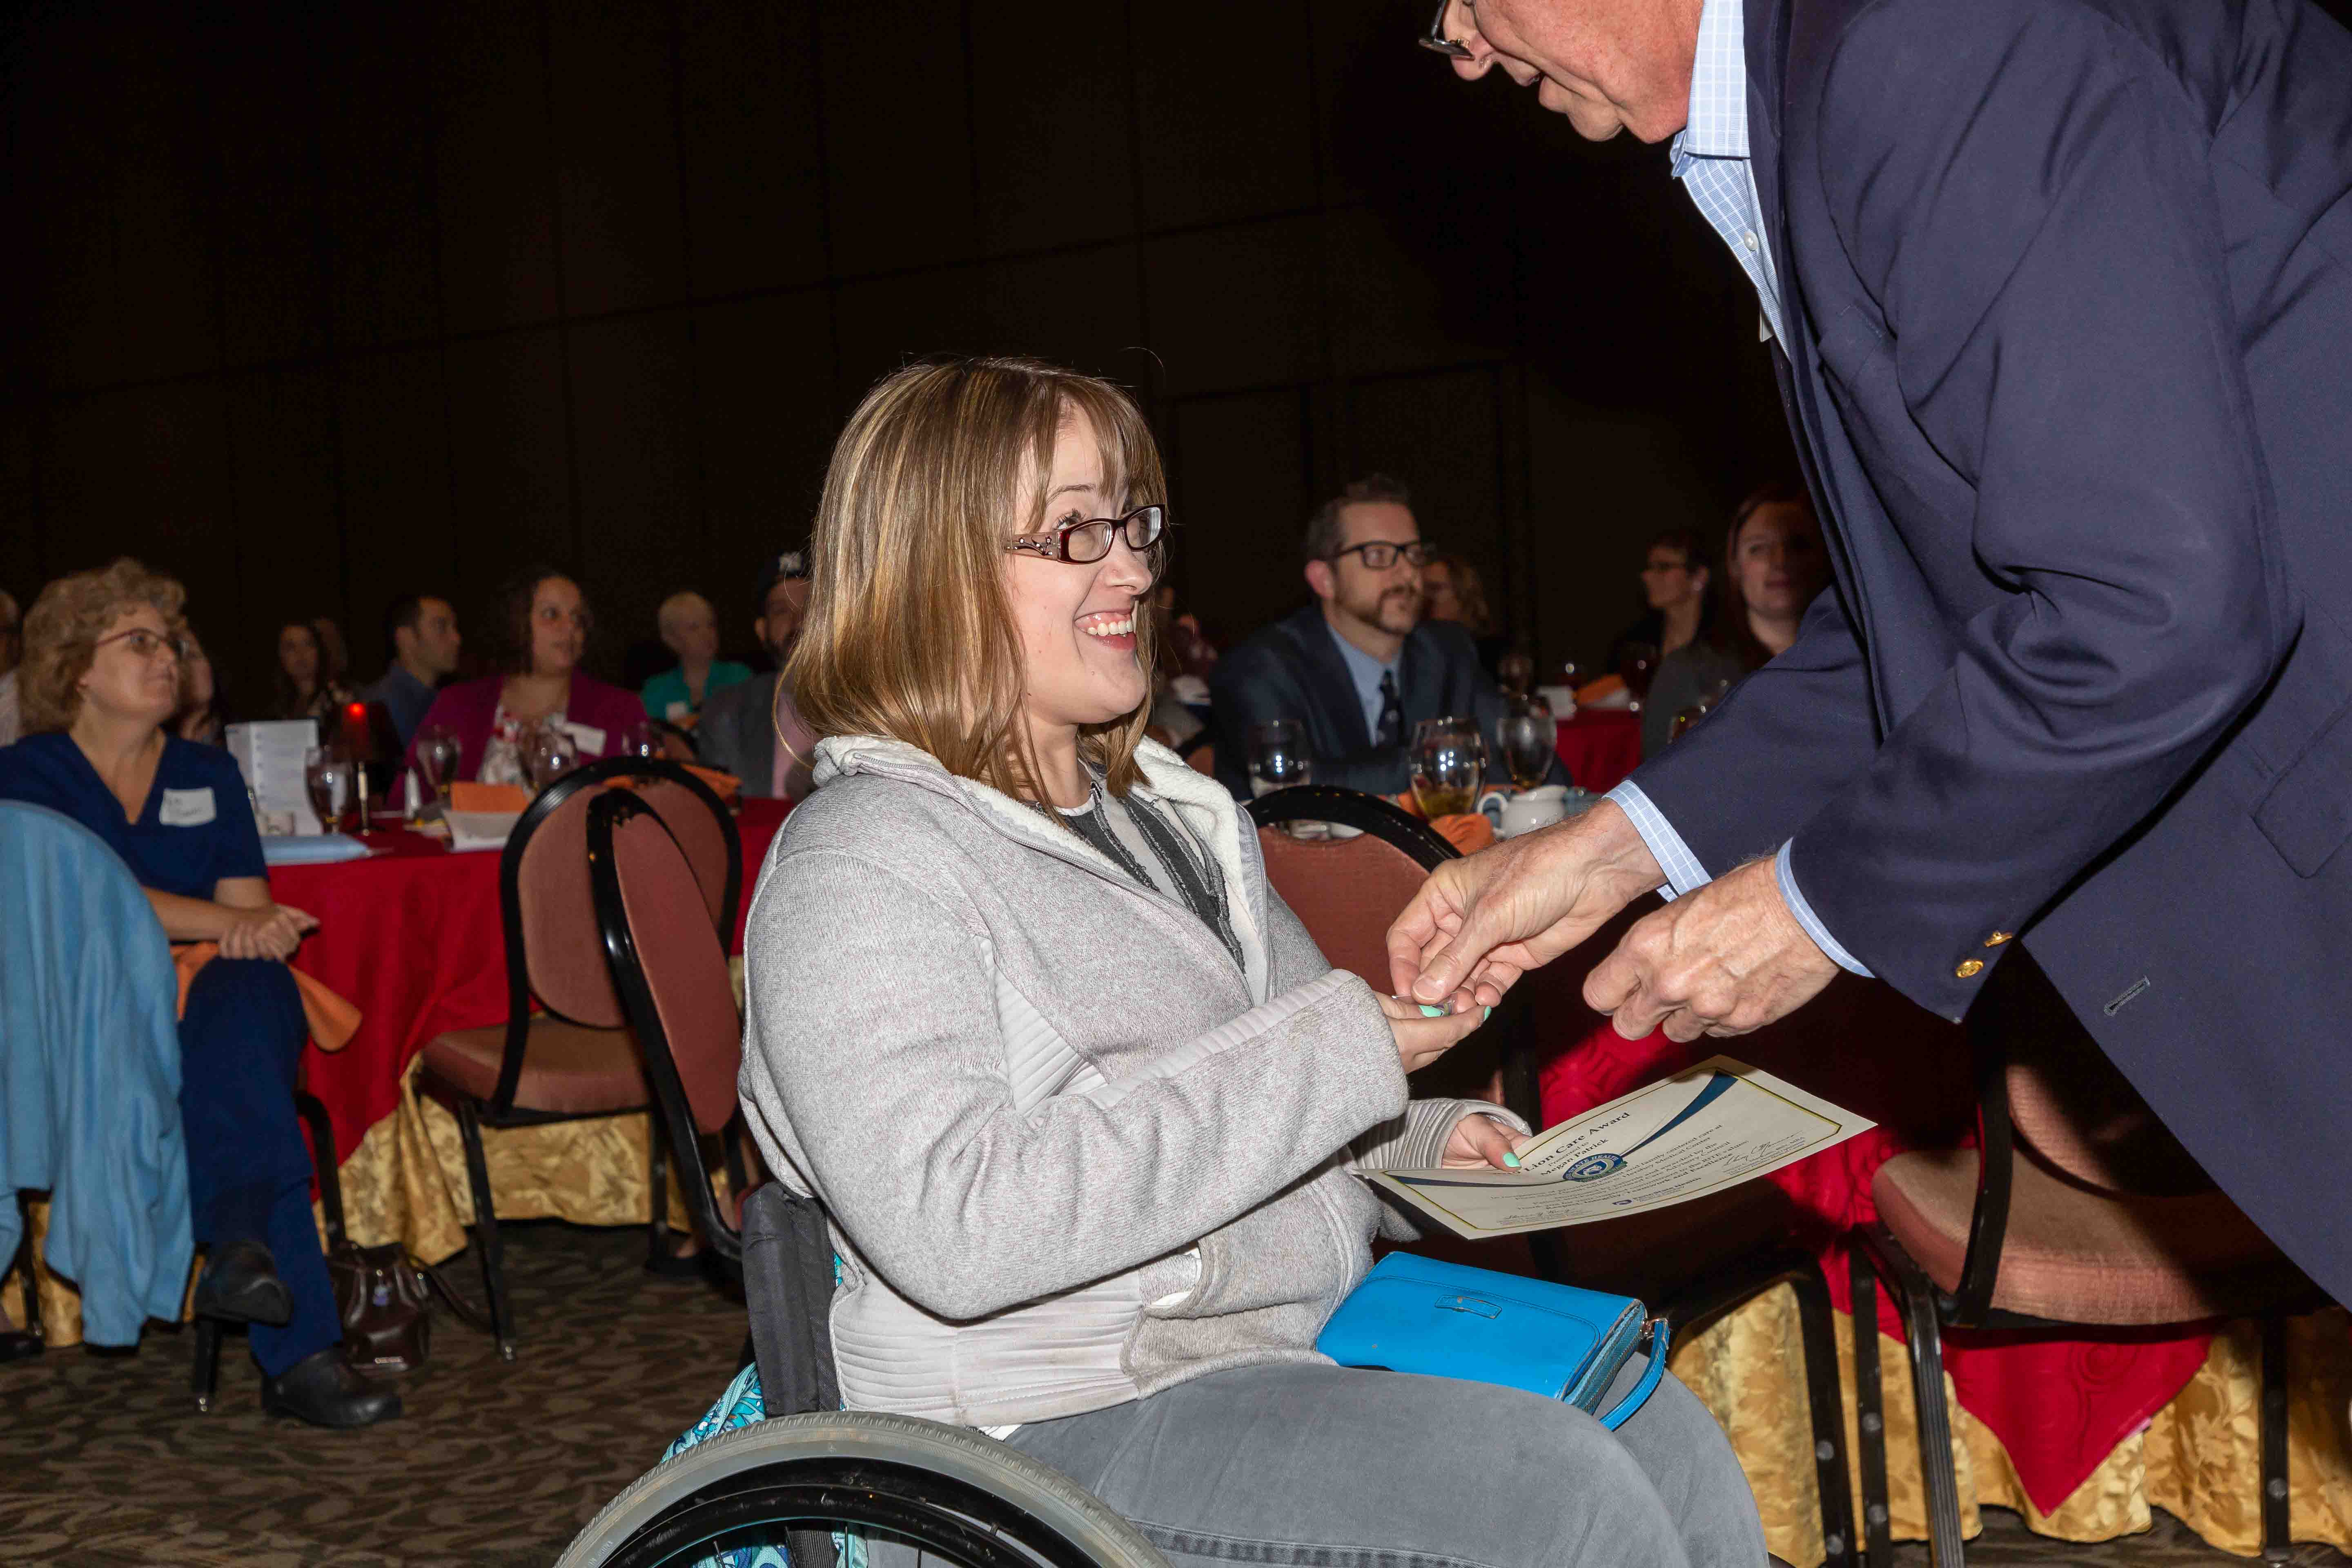 Megan Patrick, wearing a sweatshirt and jeans, smiles at a man in a sport coat who is placing something in her hand. In her other hand, she holds a certificate.